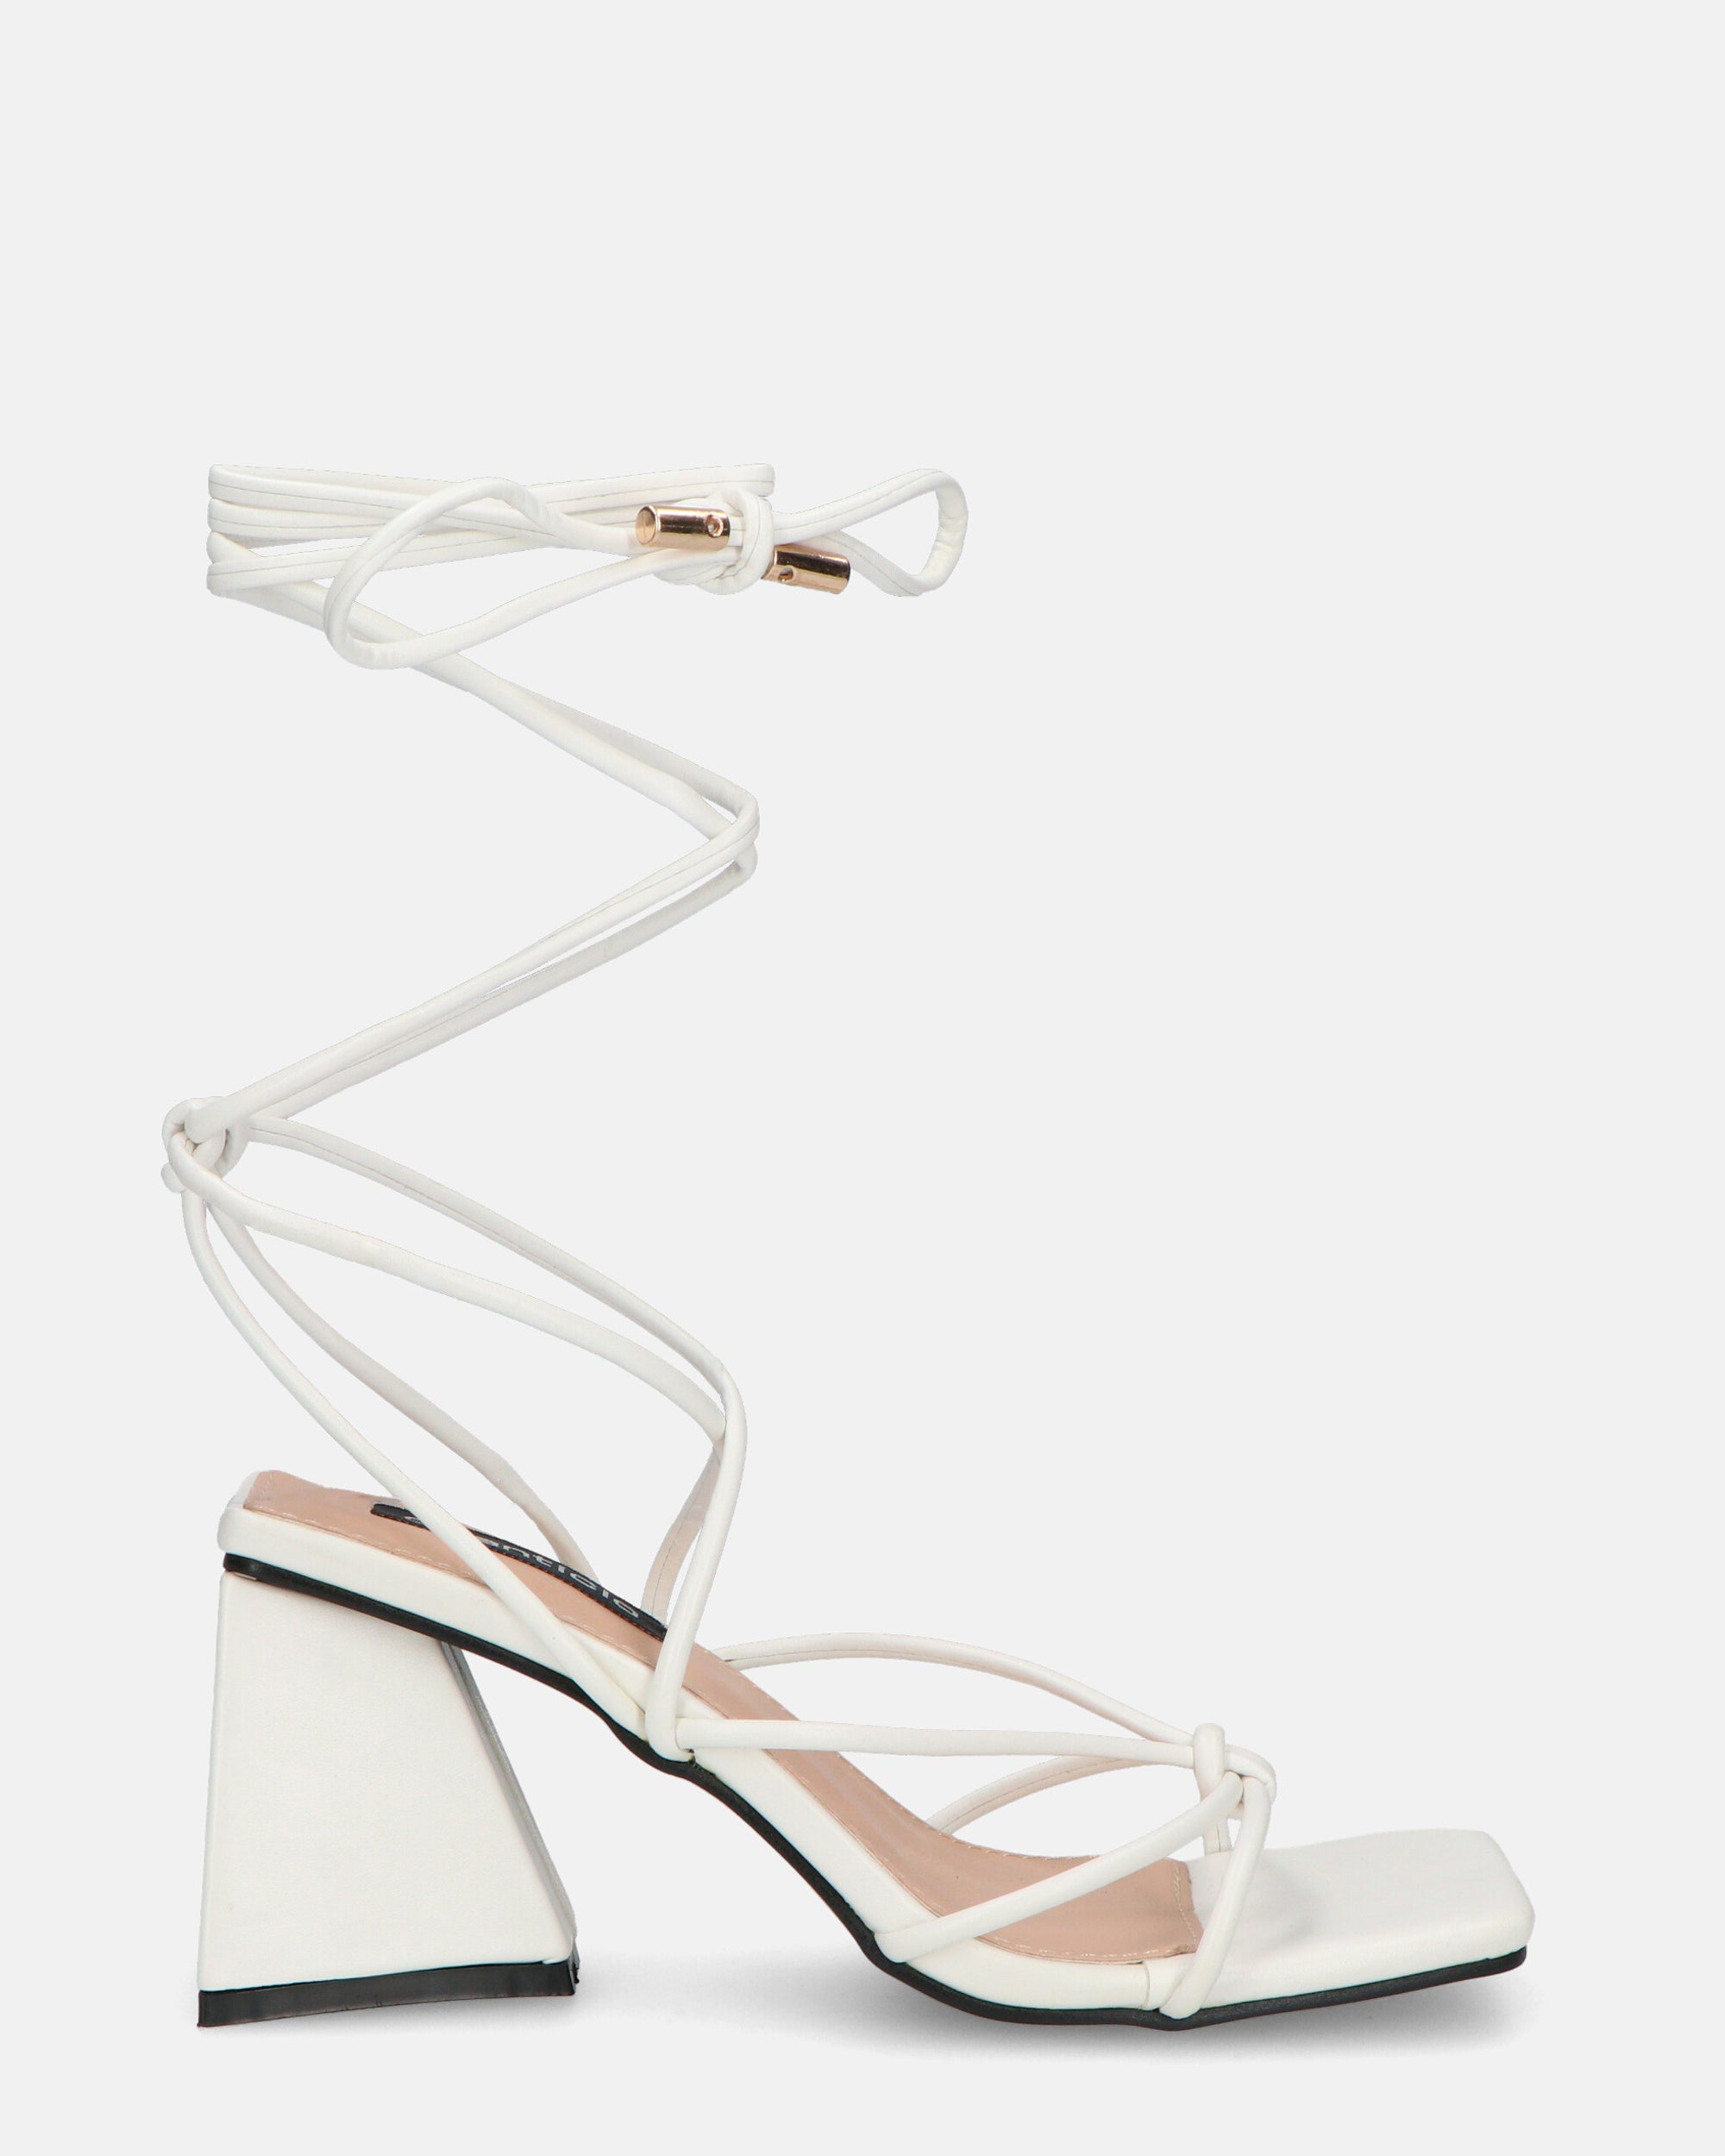 MELISA - sandals with laces in white PU